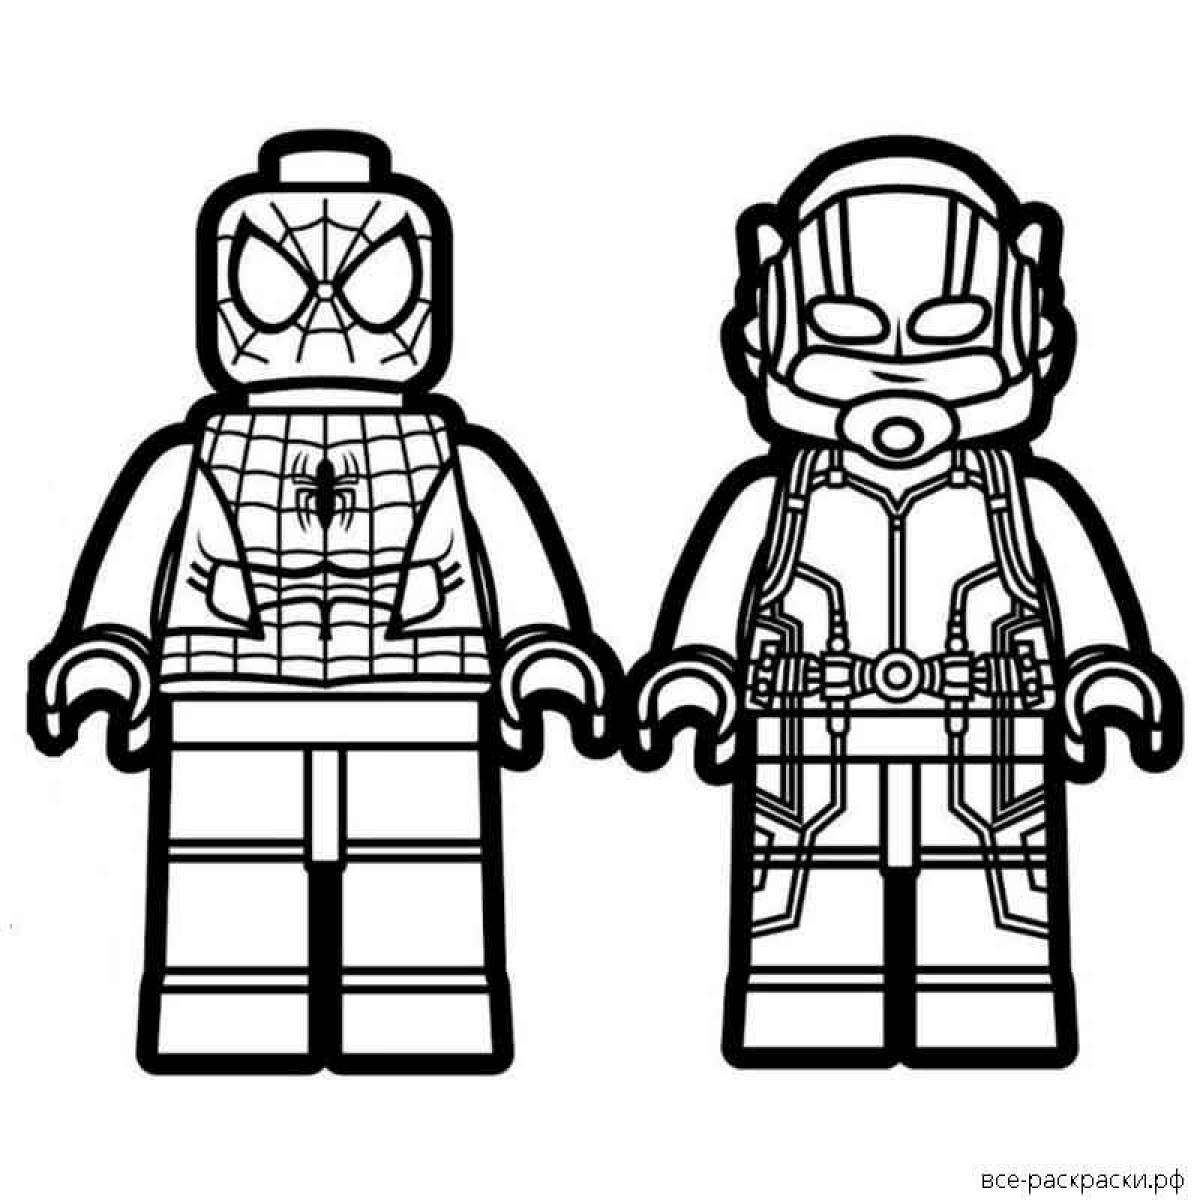 Cute lego spider man coloring page